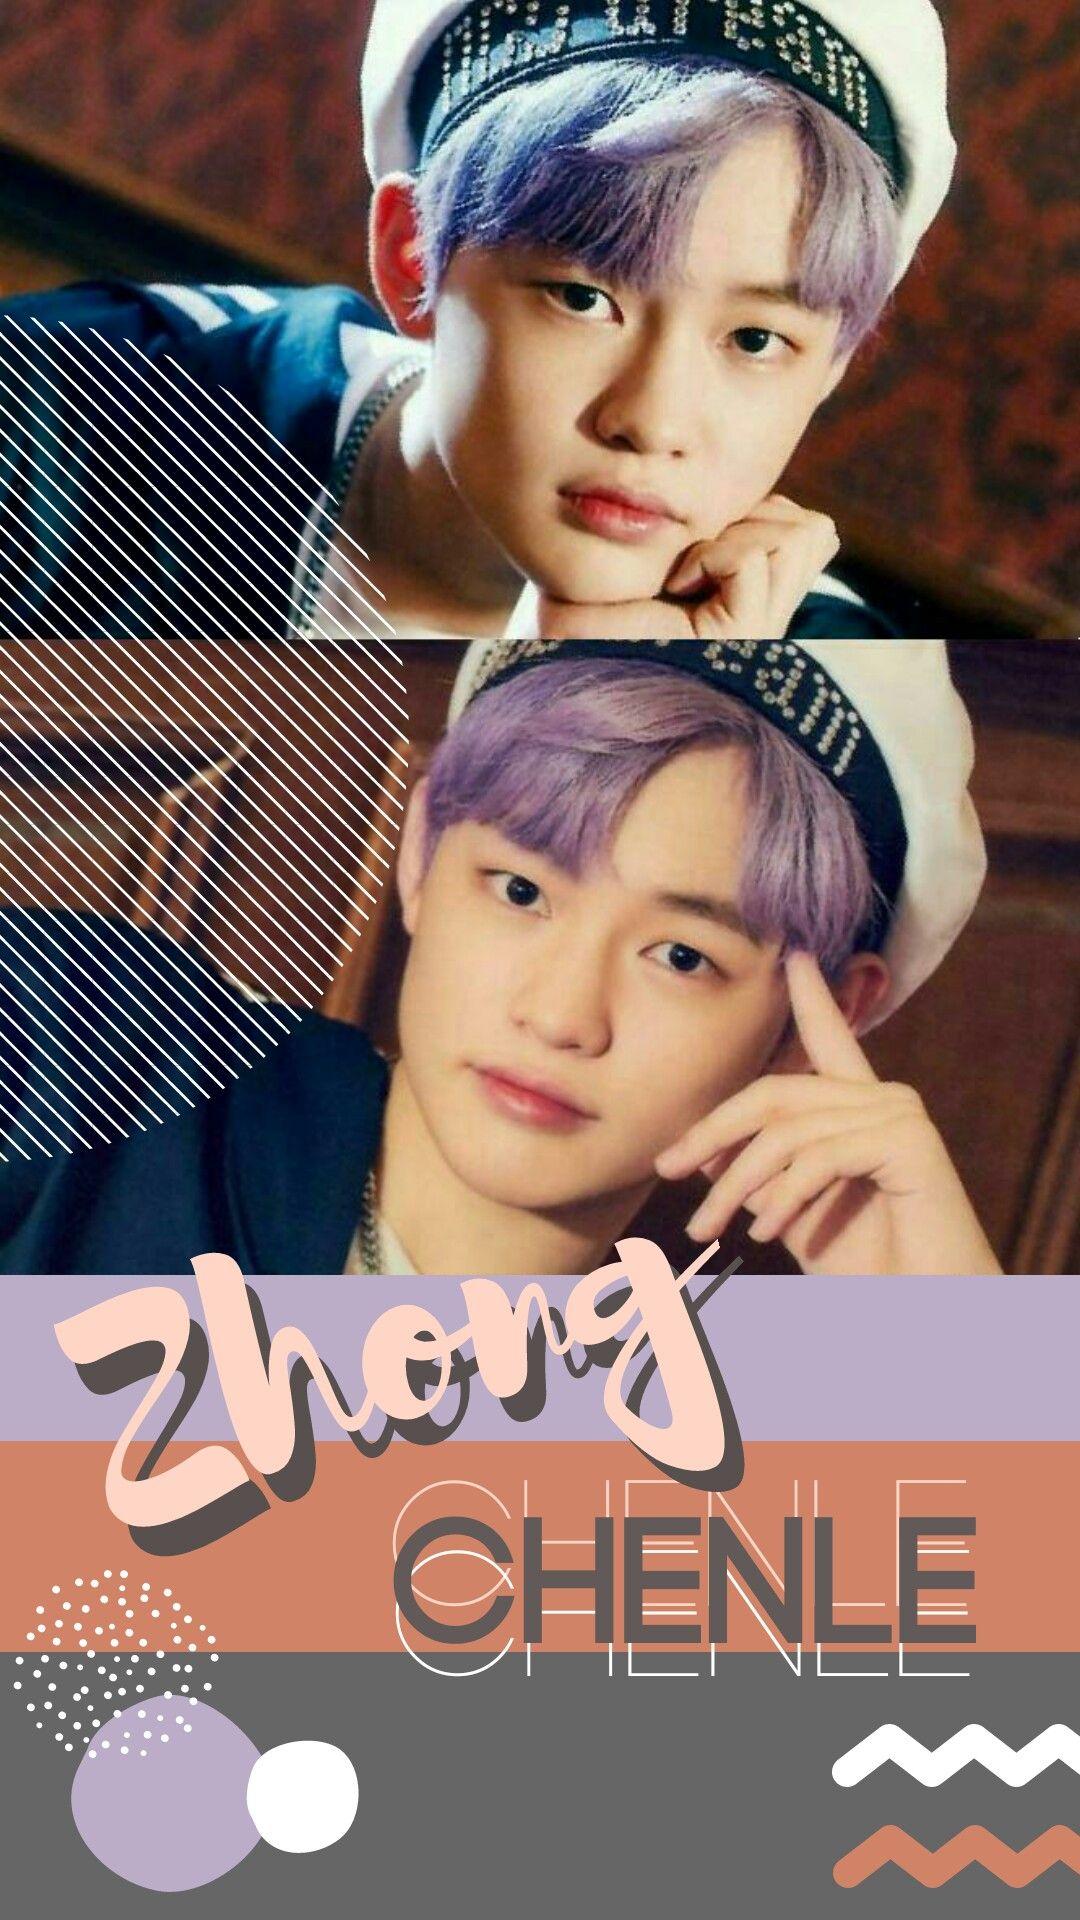 Nct Chenle wallpaper by Hanin #nctdream #nctwallpaper